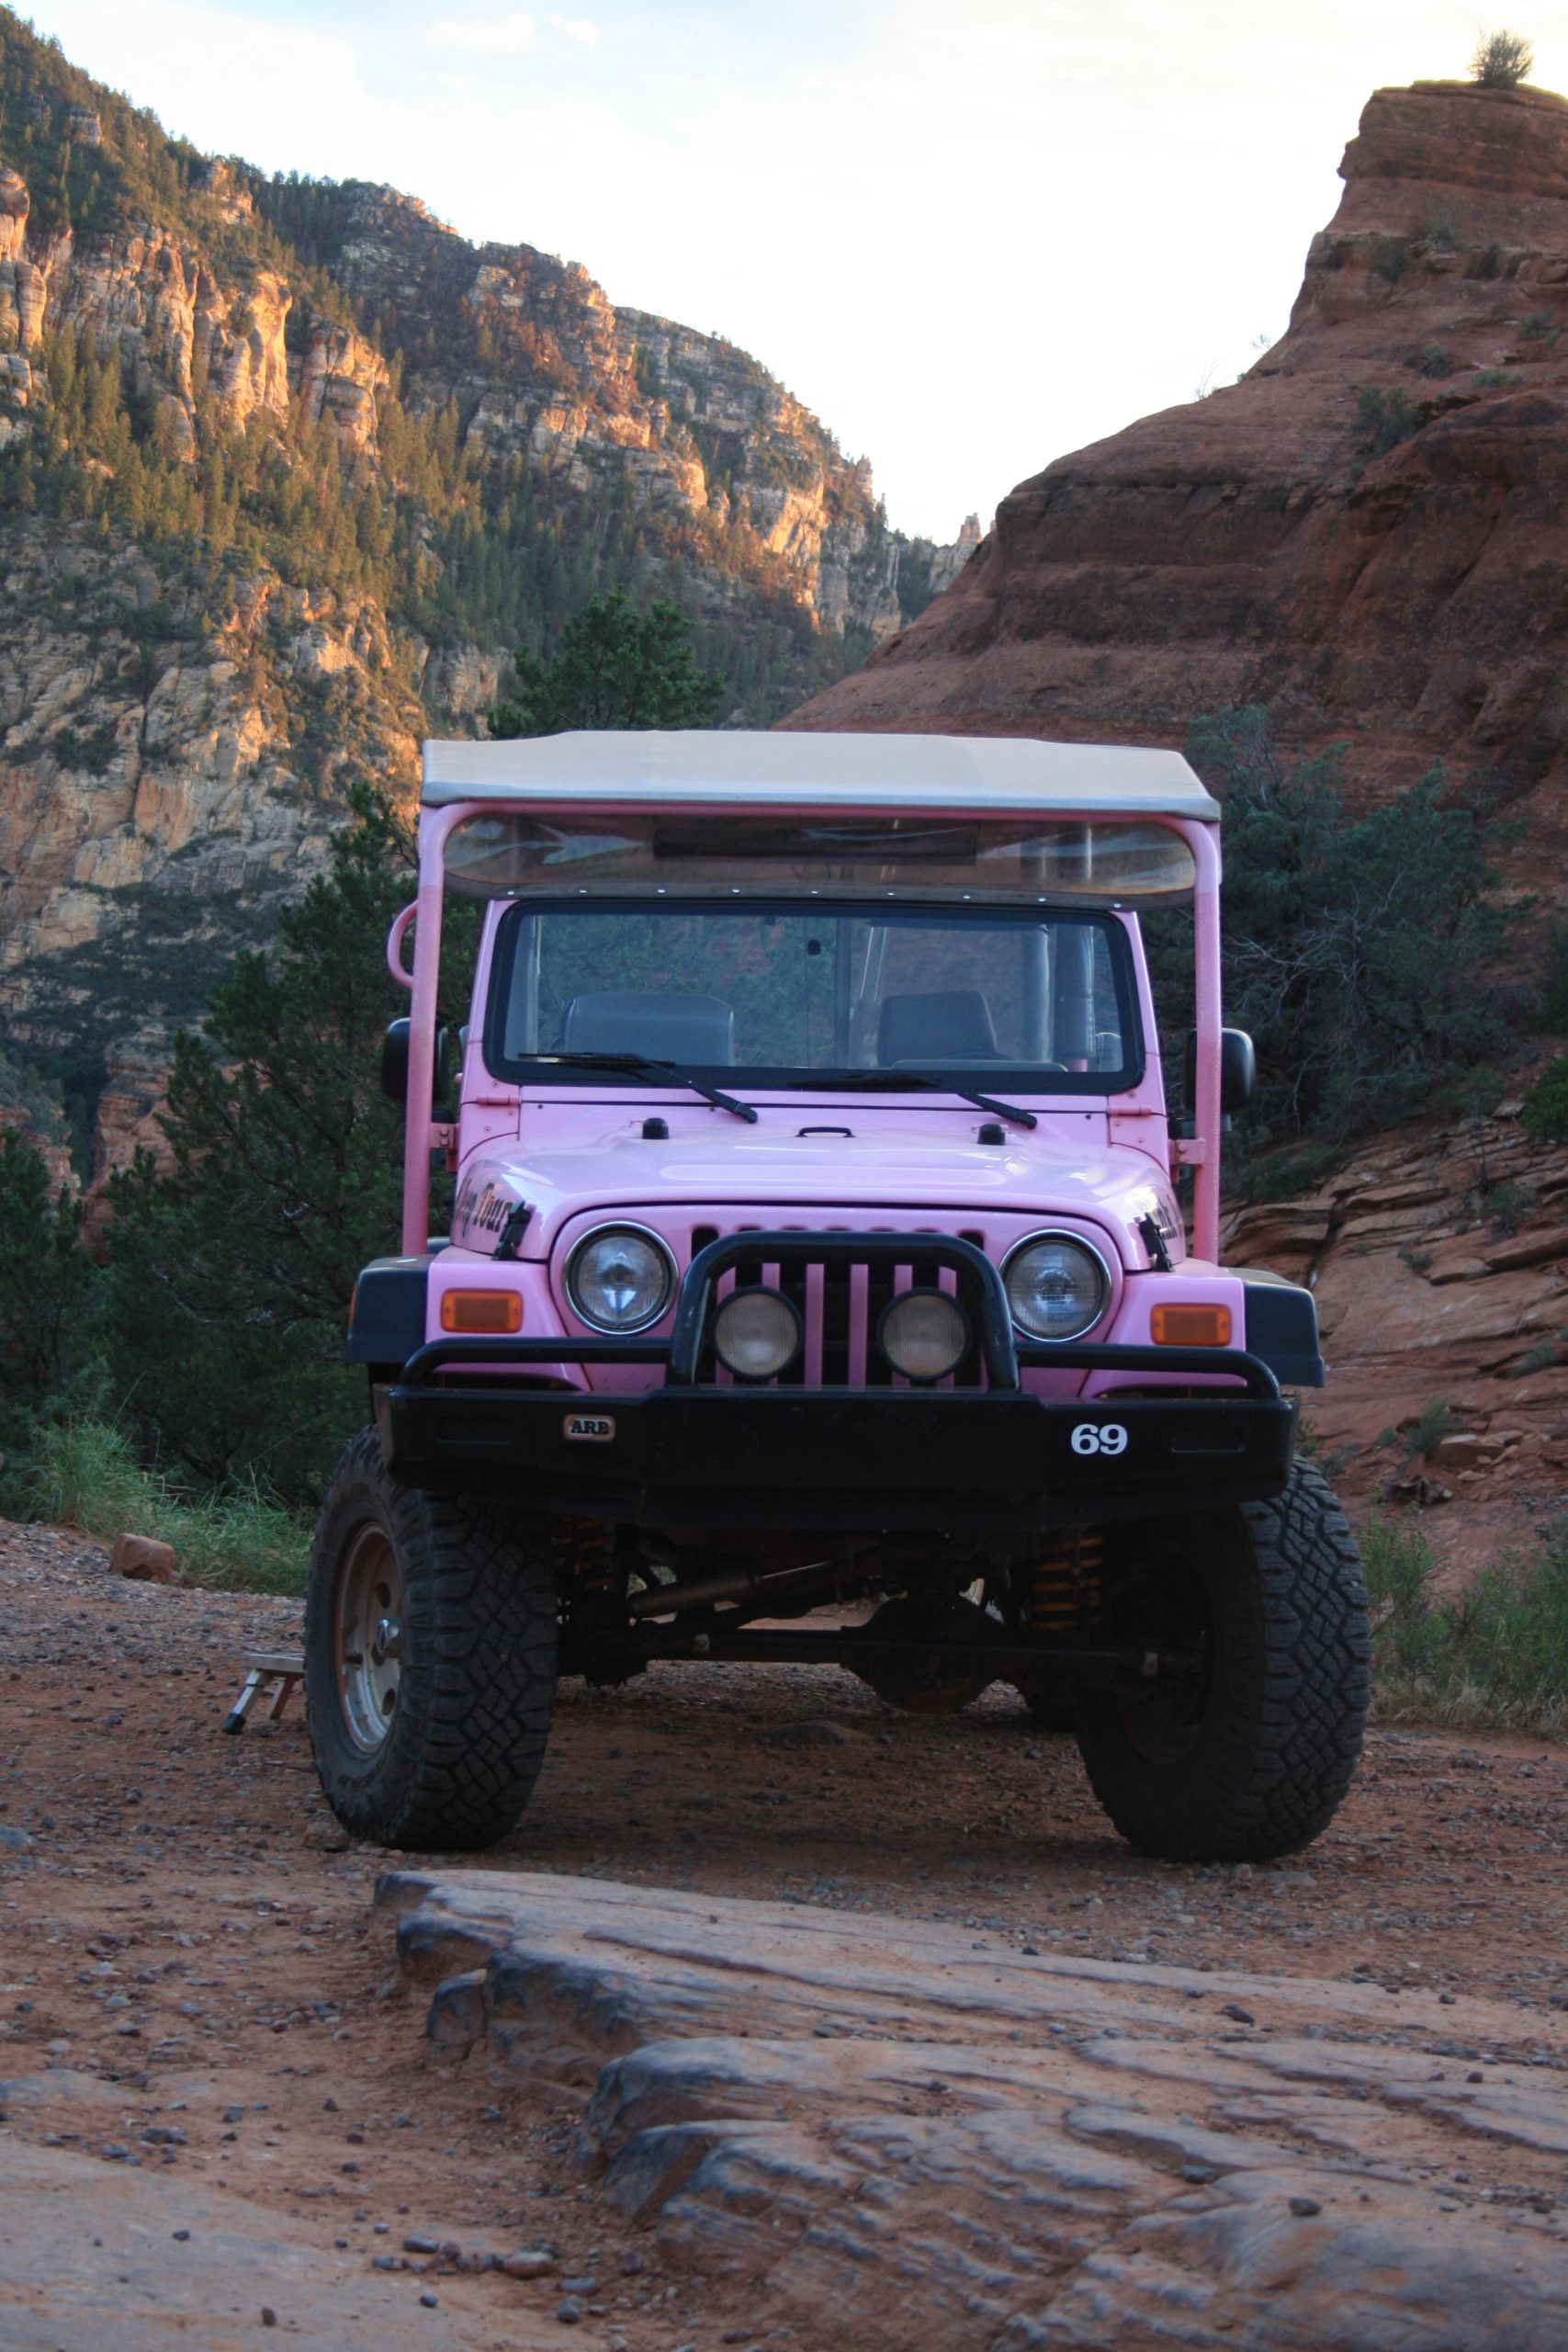 Jeep Tours in Sedona- Are They Really Worth it?